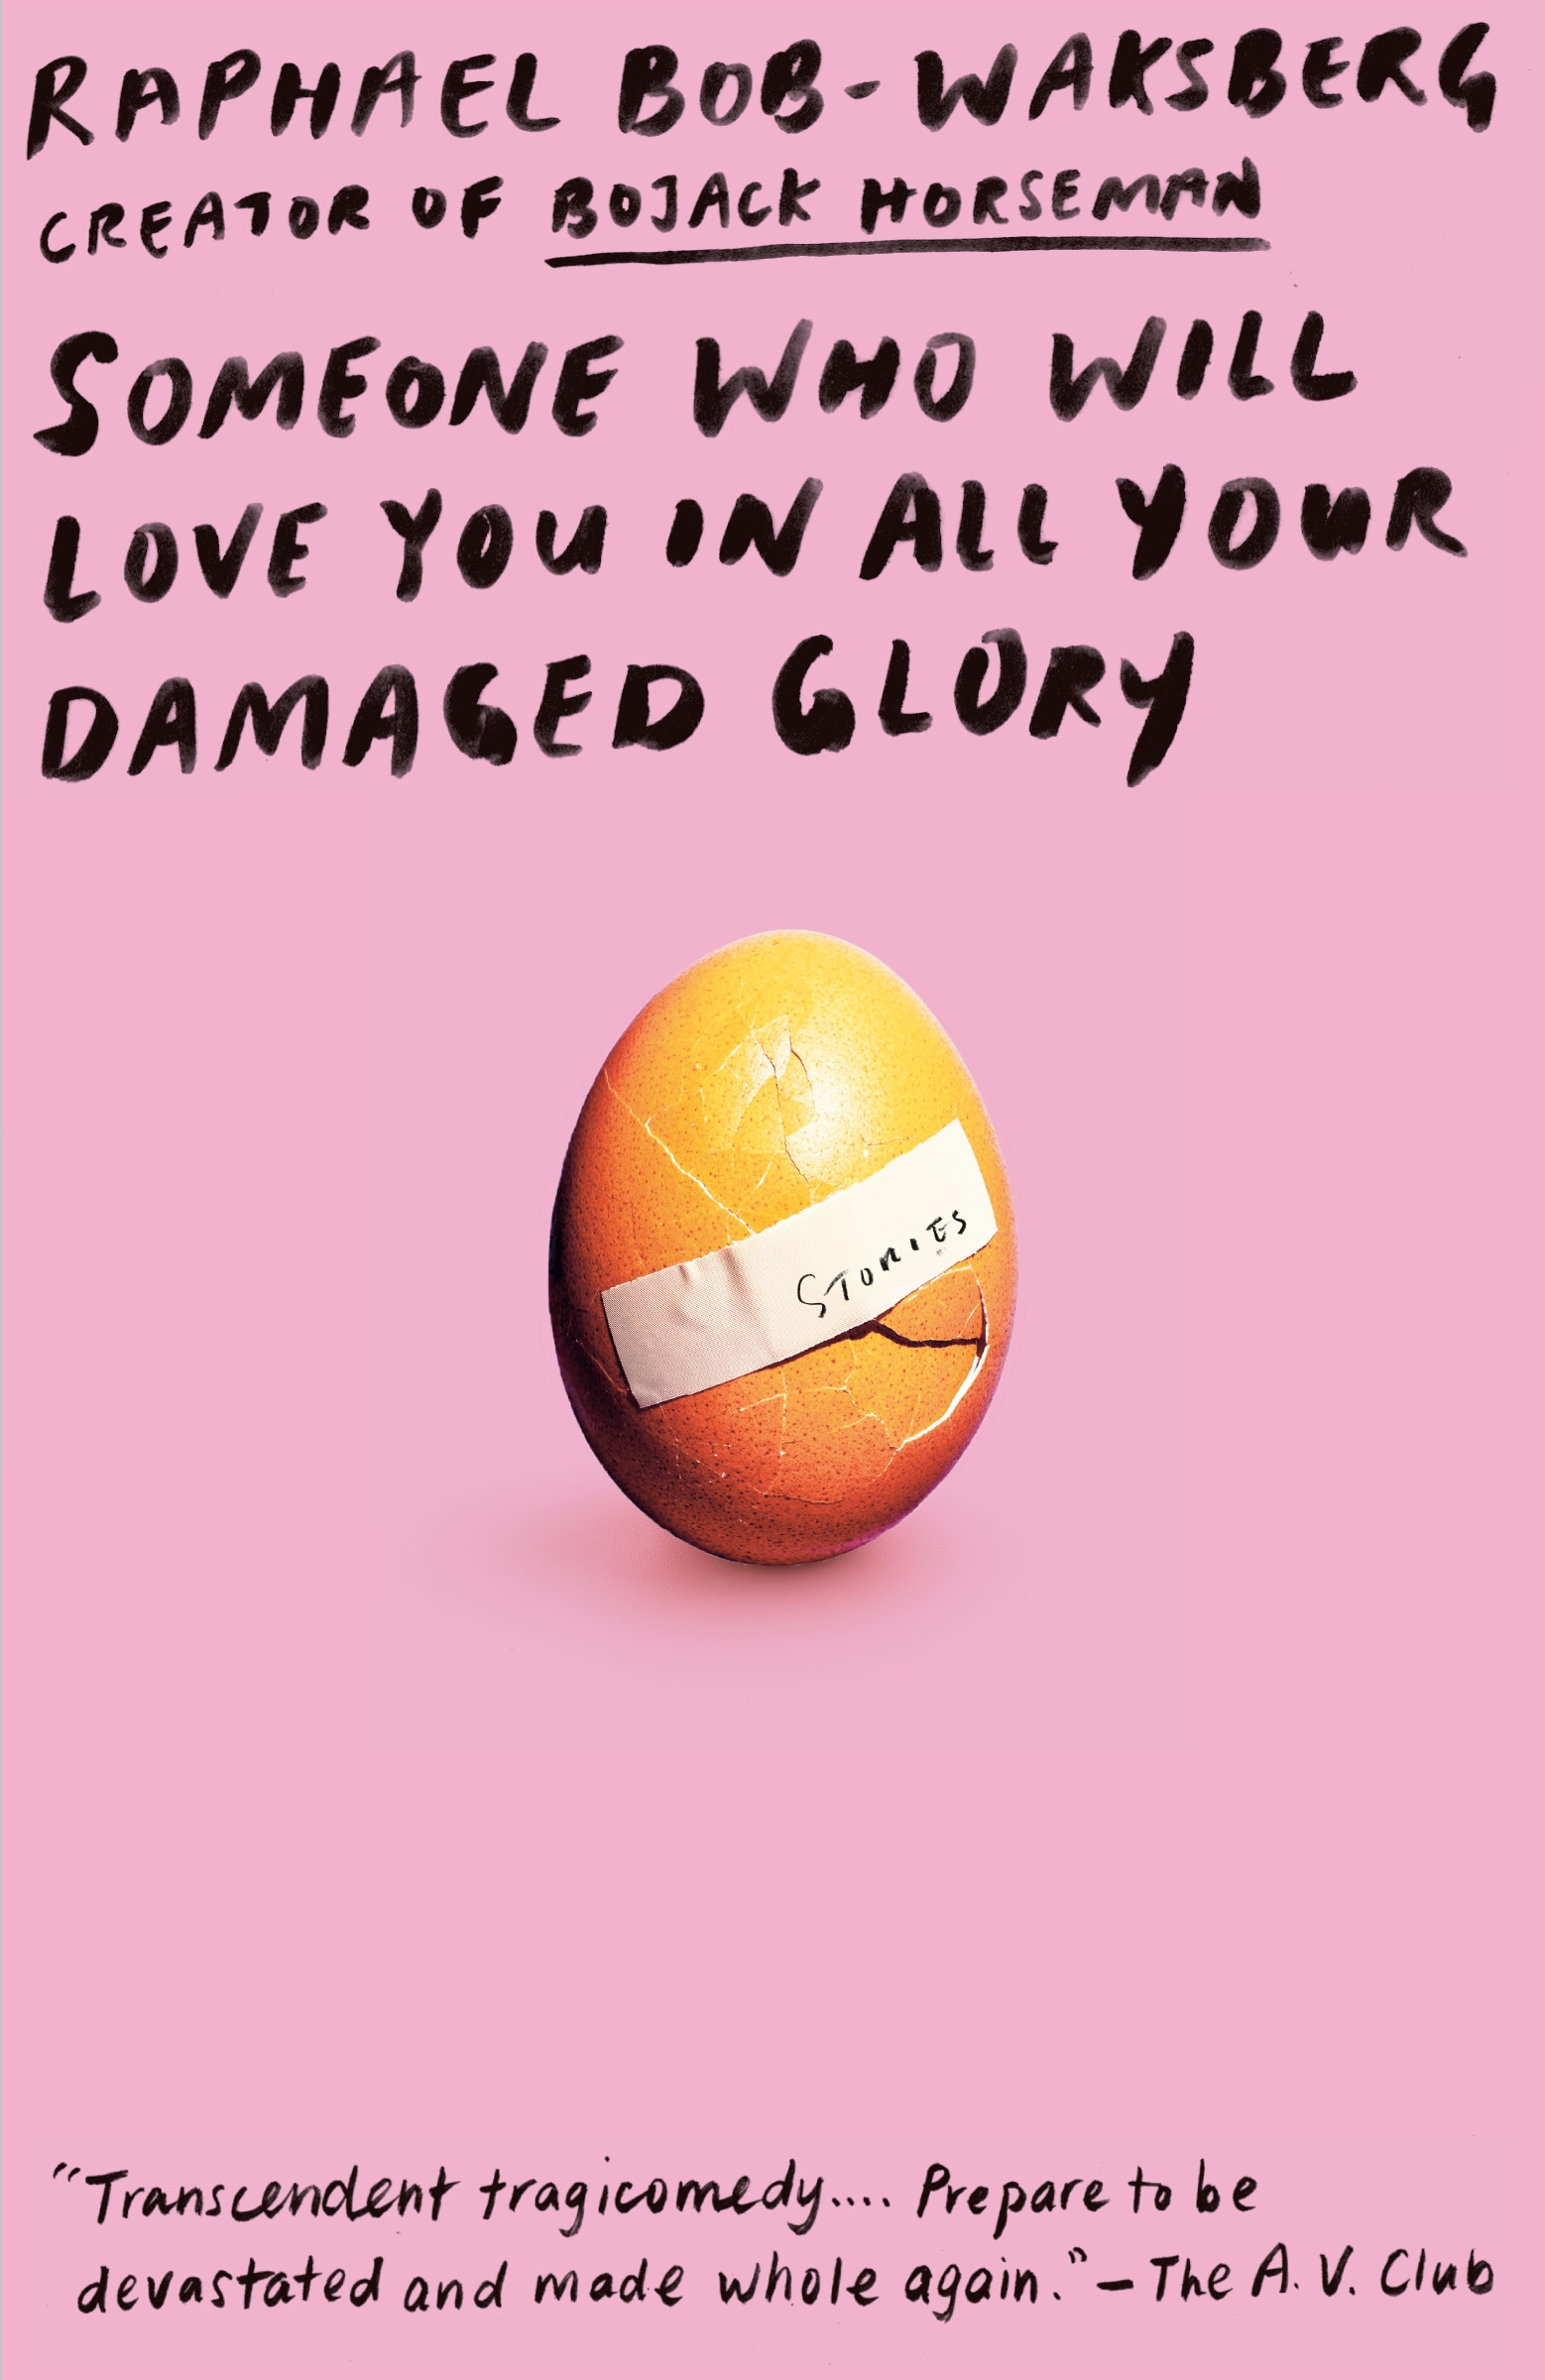 Someone Who Will Love You in All Your Damaged Glory by Raphael Bob-Waksberg  - Penguin Books Australia